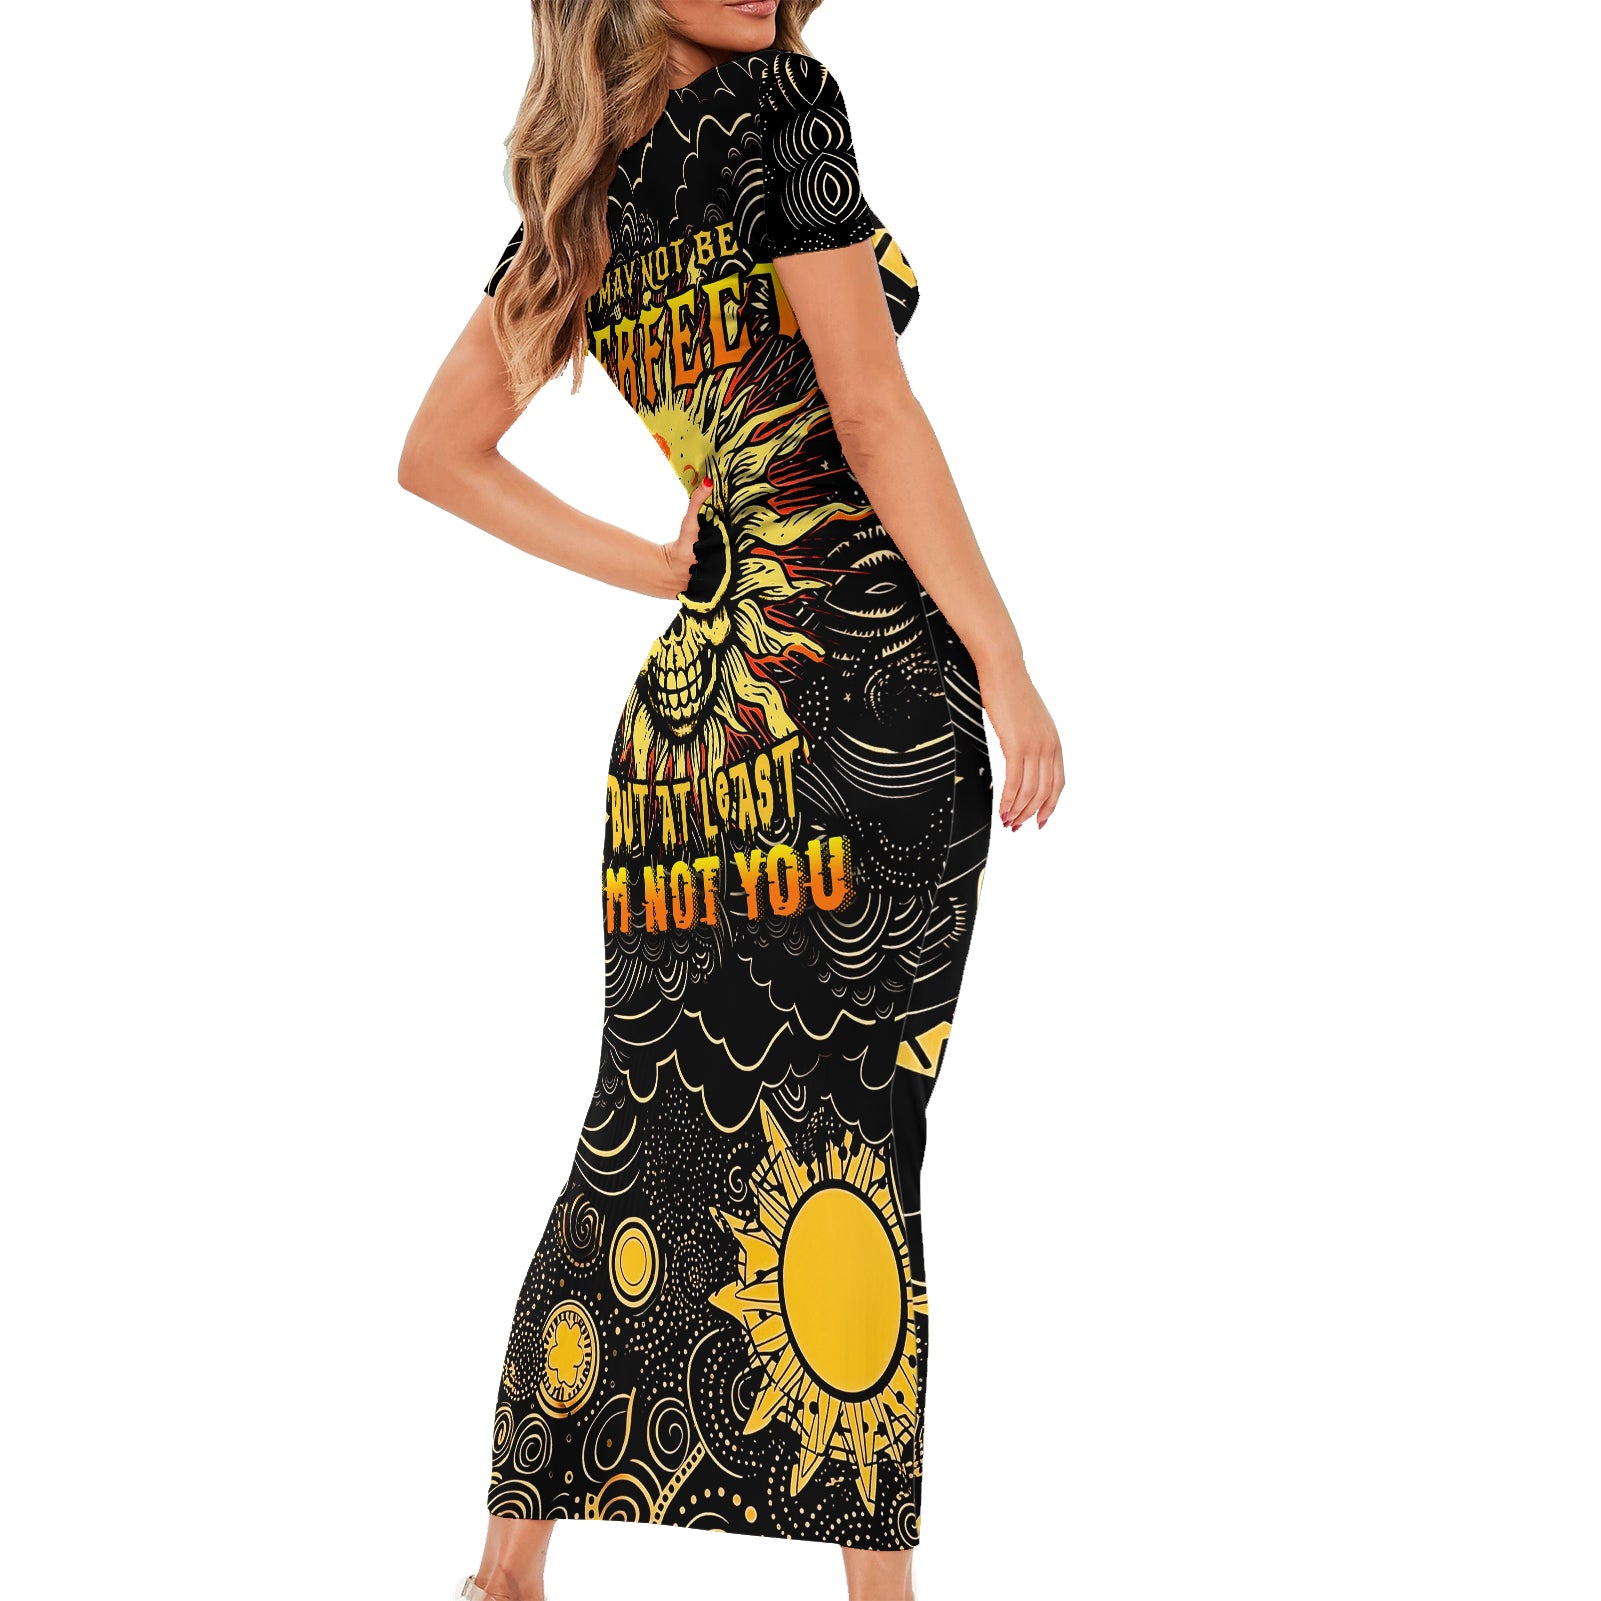 sun-skull-short-sleeve-bodycon-dress-i-may-not-be-perfect-but-at-least-im-not-you